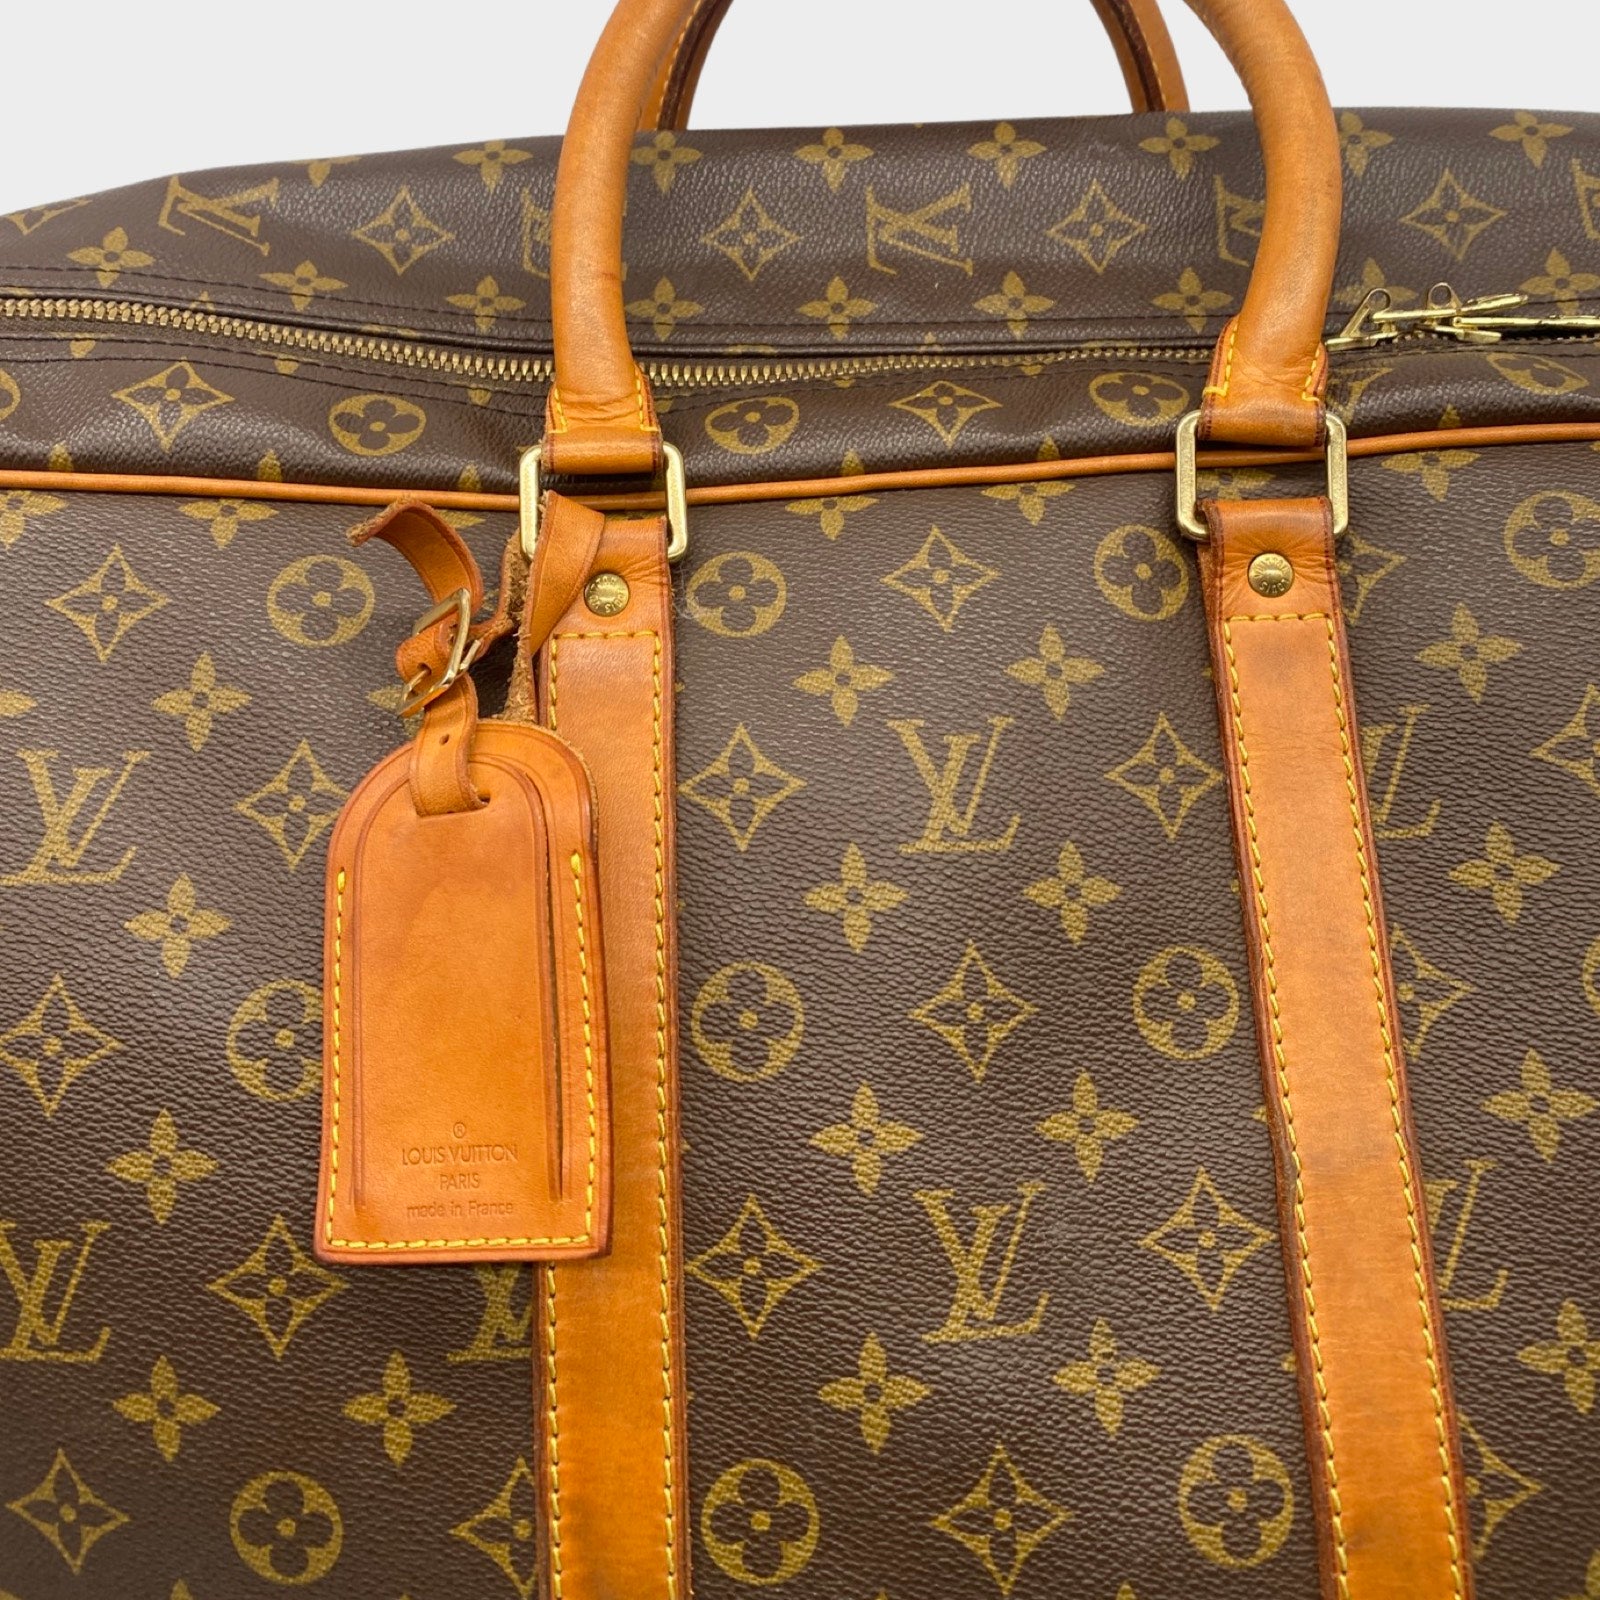 SALE Ultra Rare and Vintage LOUIS VUITTON Keepall Duffle  Etsy New Zealand